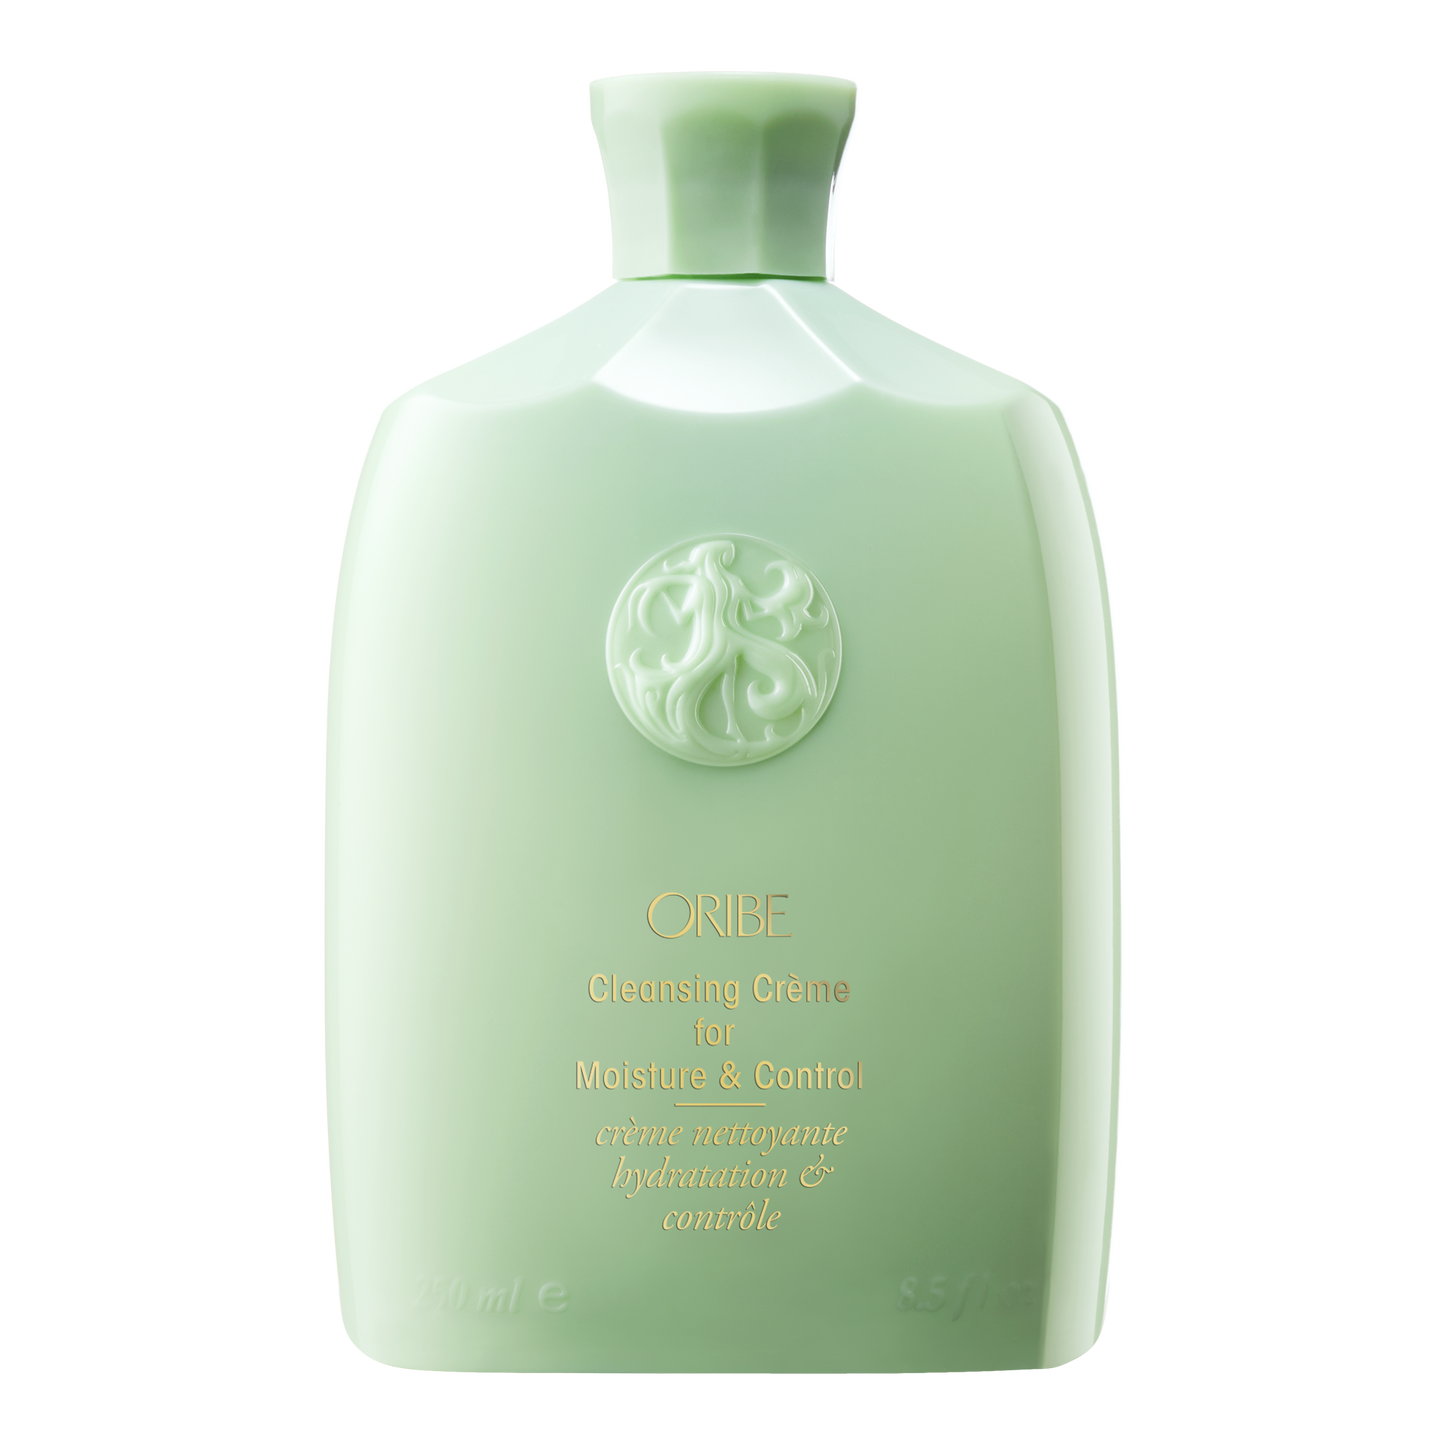 Cleansing Crème for Moisture and Control 250mL